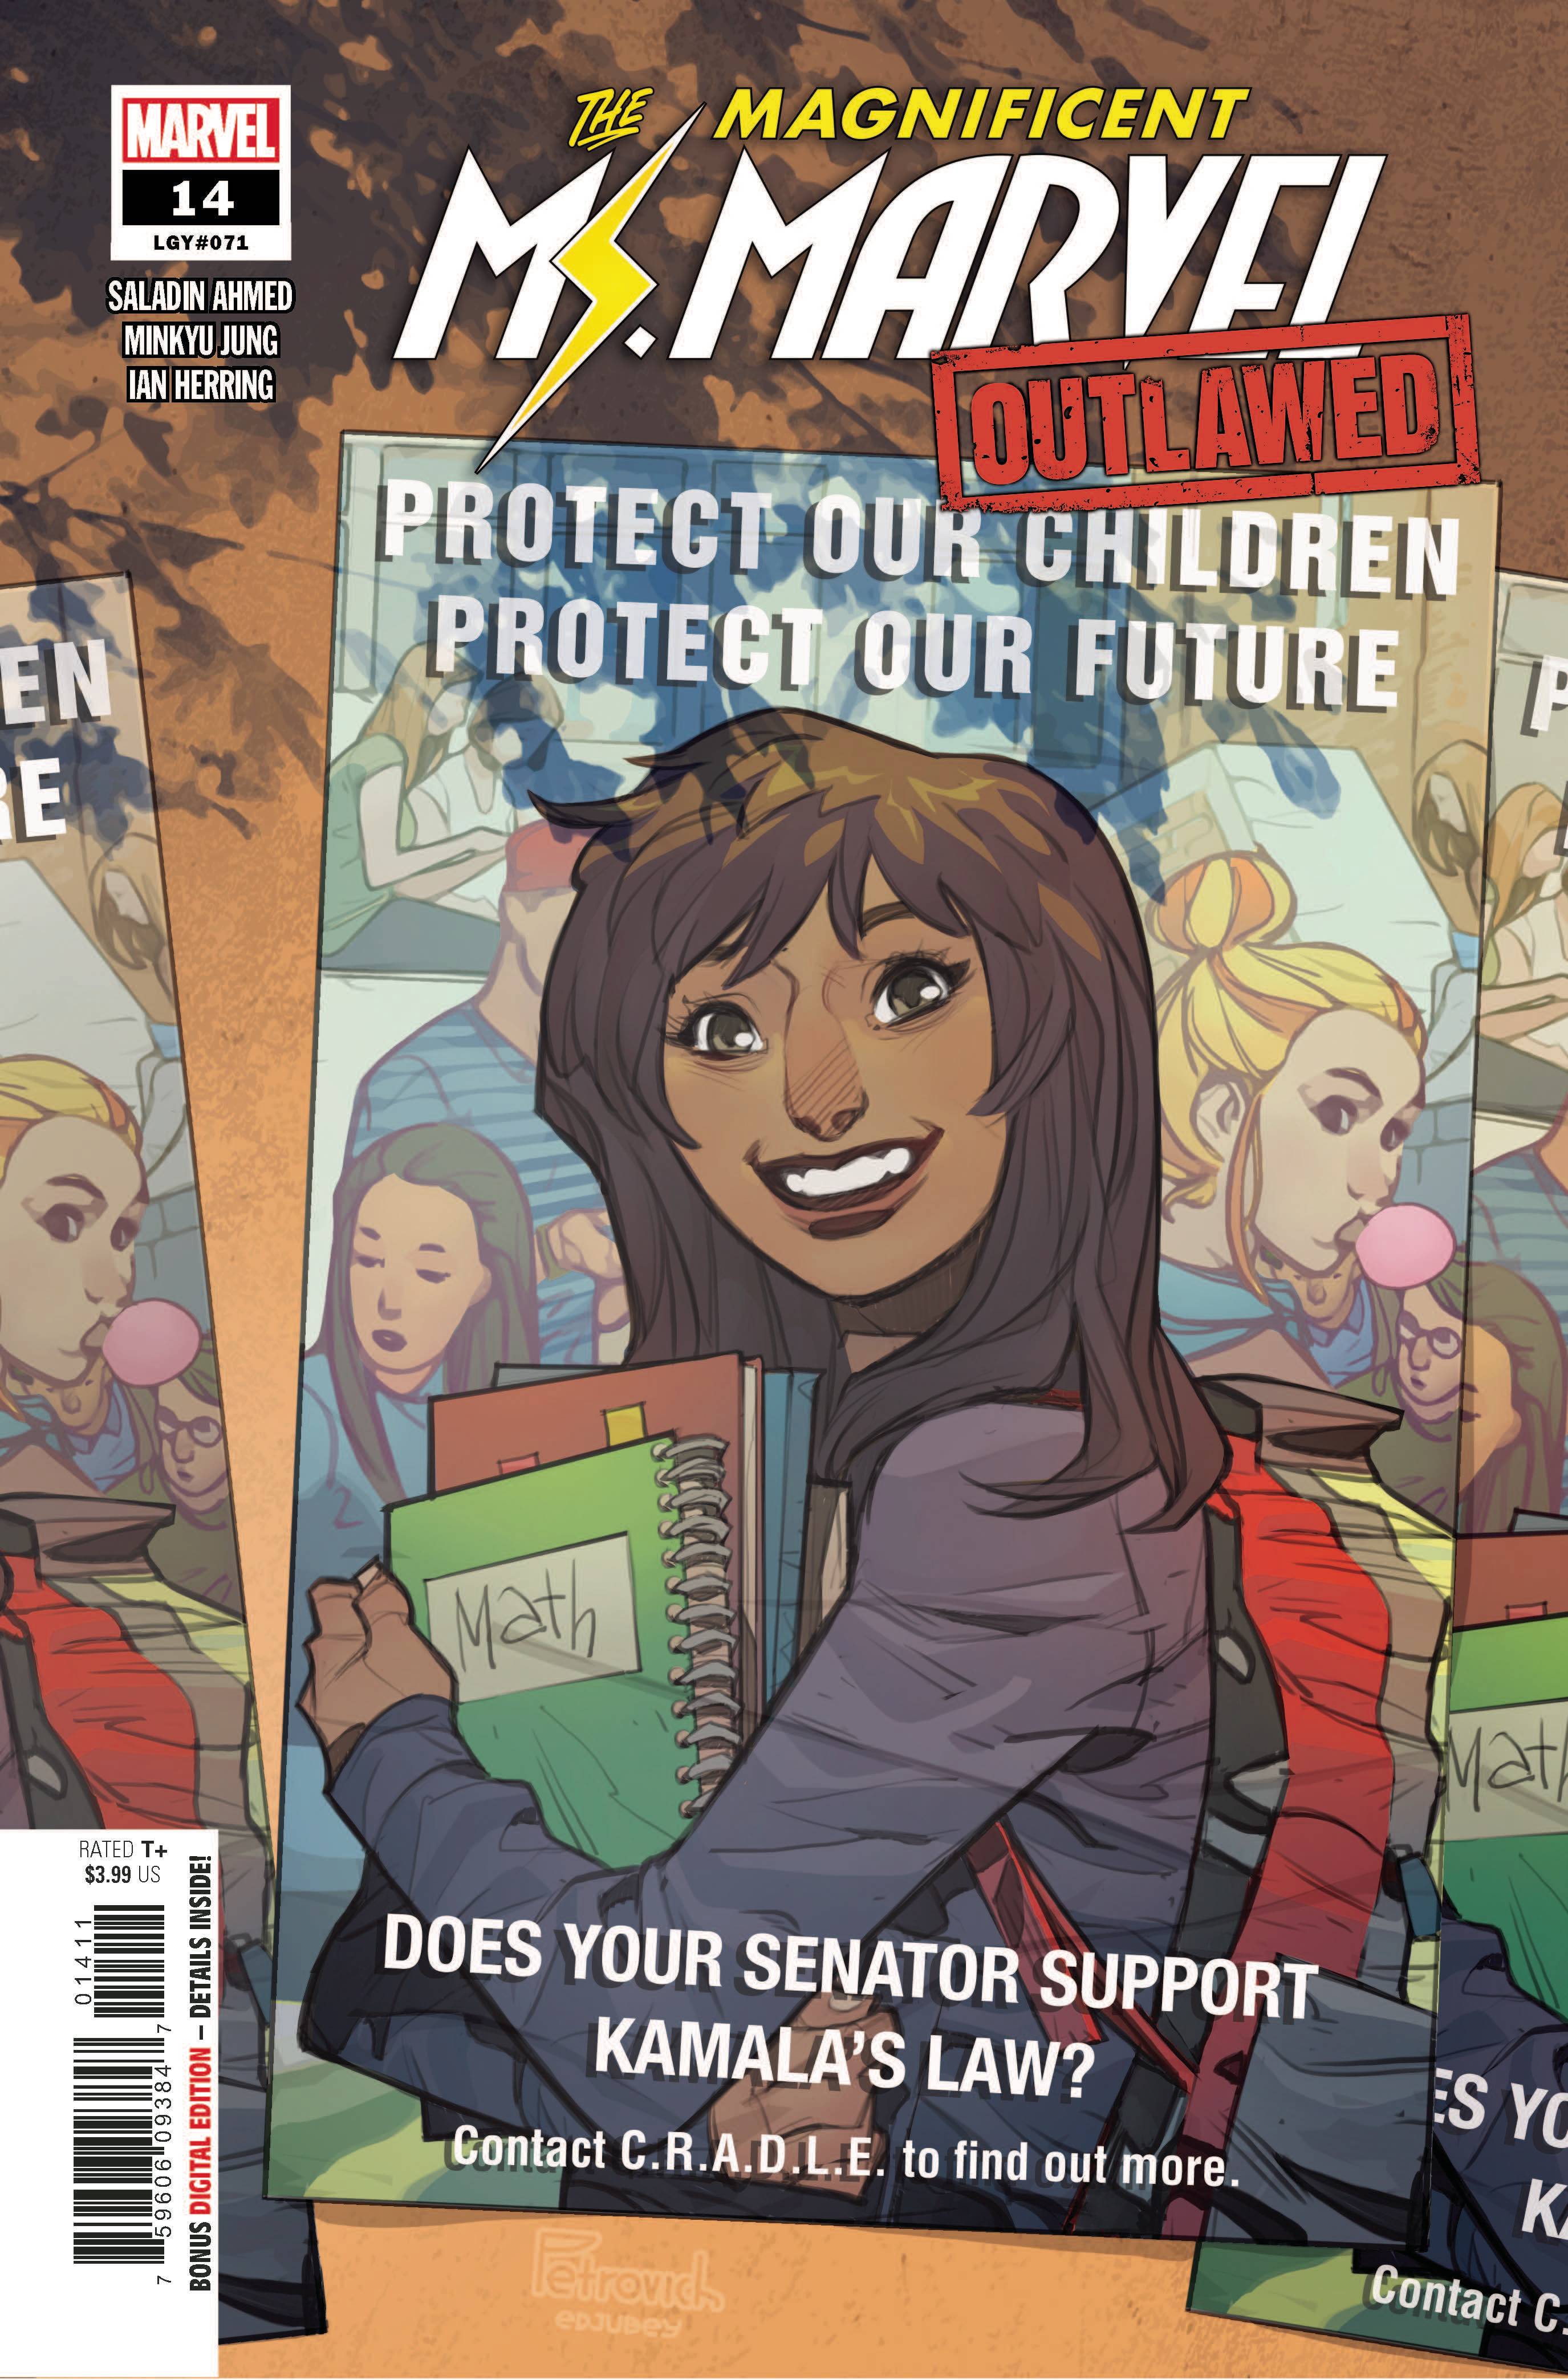 MAGNIFICENT MS MARVEL #14 OUT | Game Master's Emporium (The New GME)